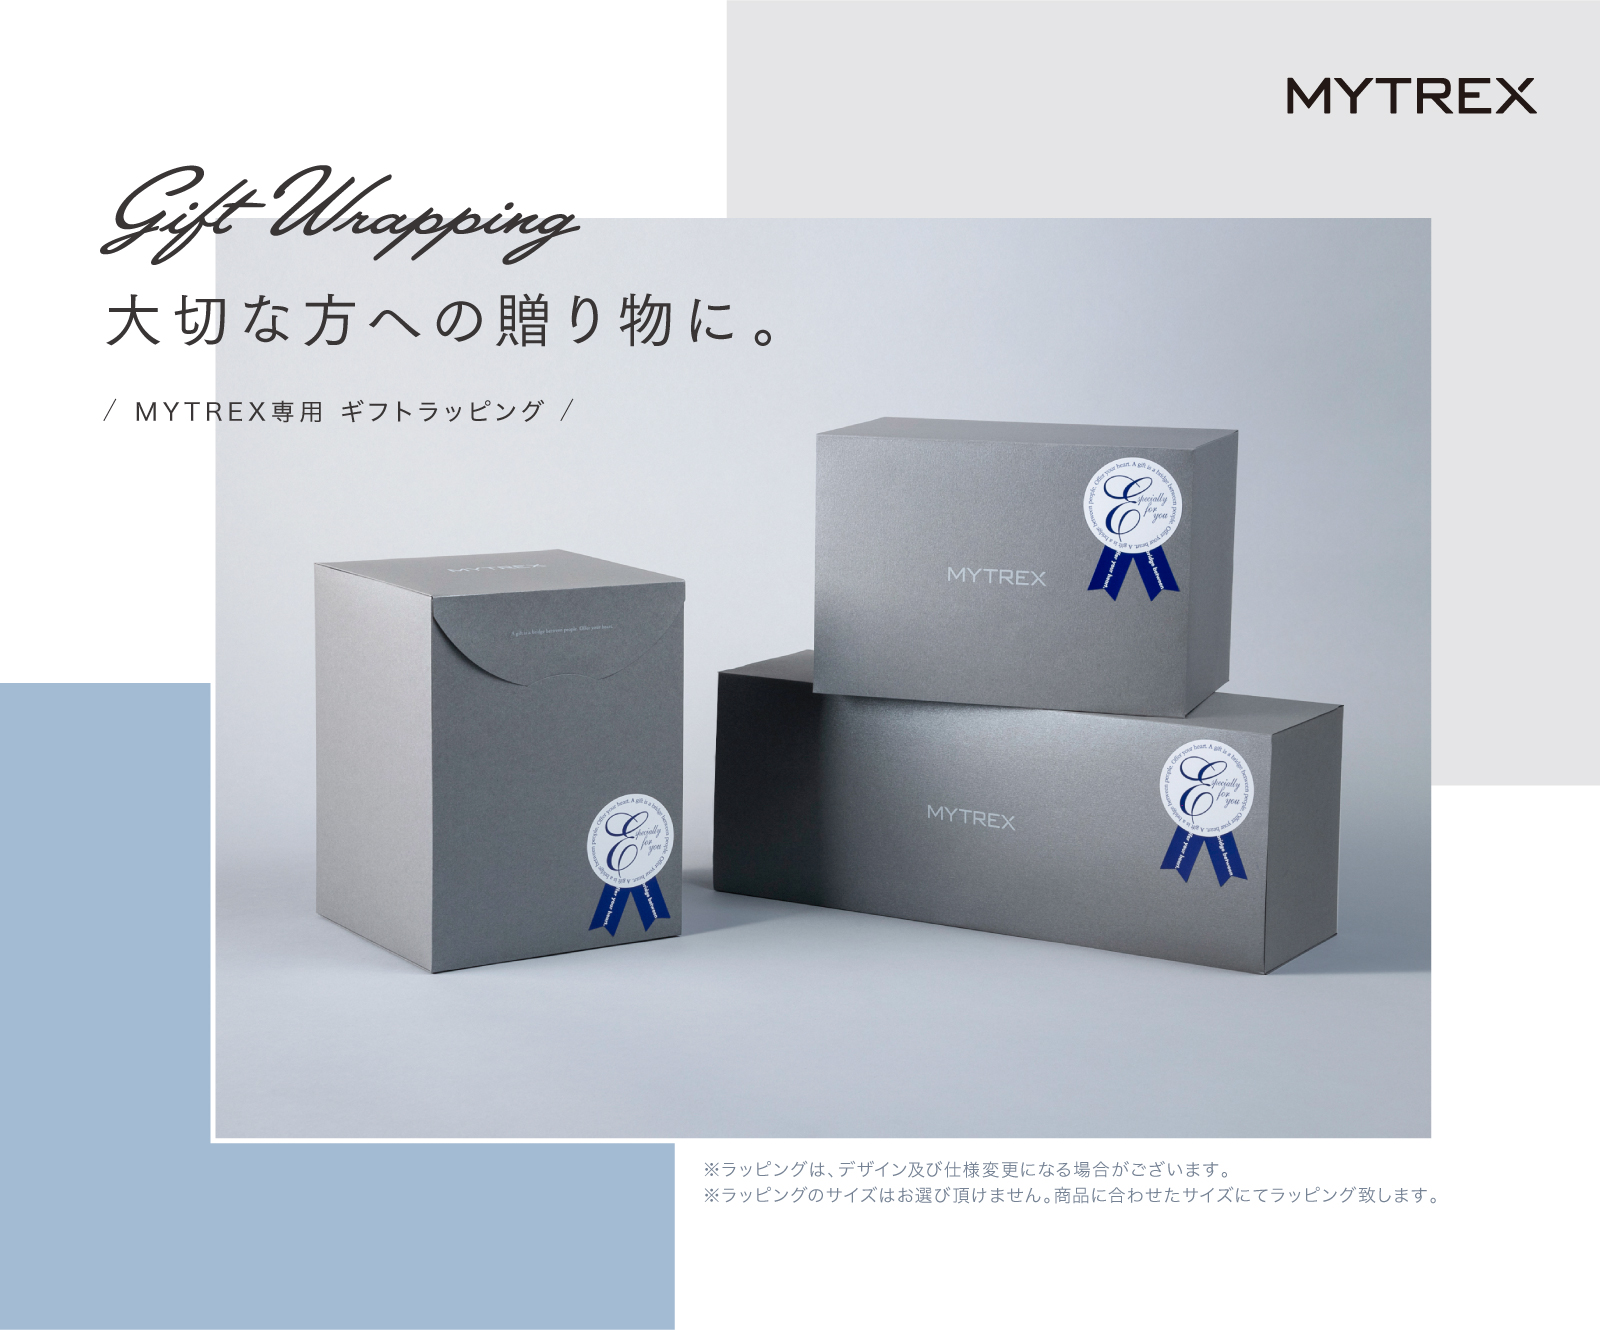 Gift Wrapping – MYTREX専用ギフトラッピング（ボックス） — MYTREX 